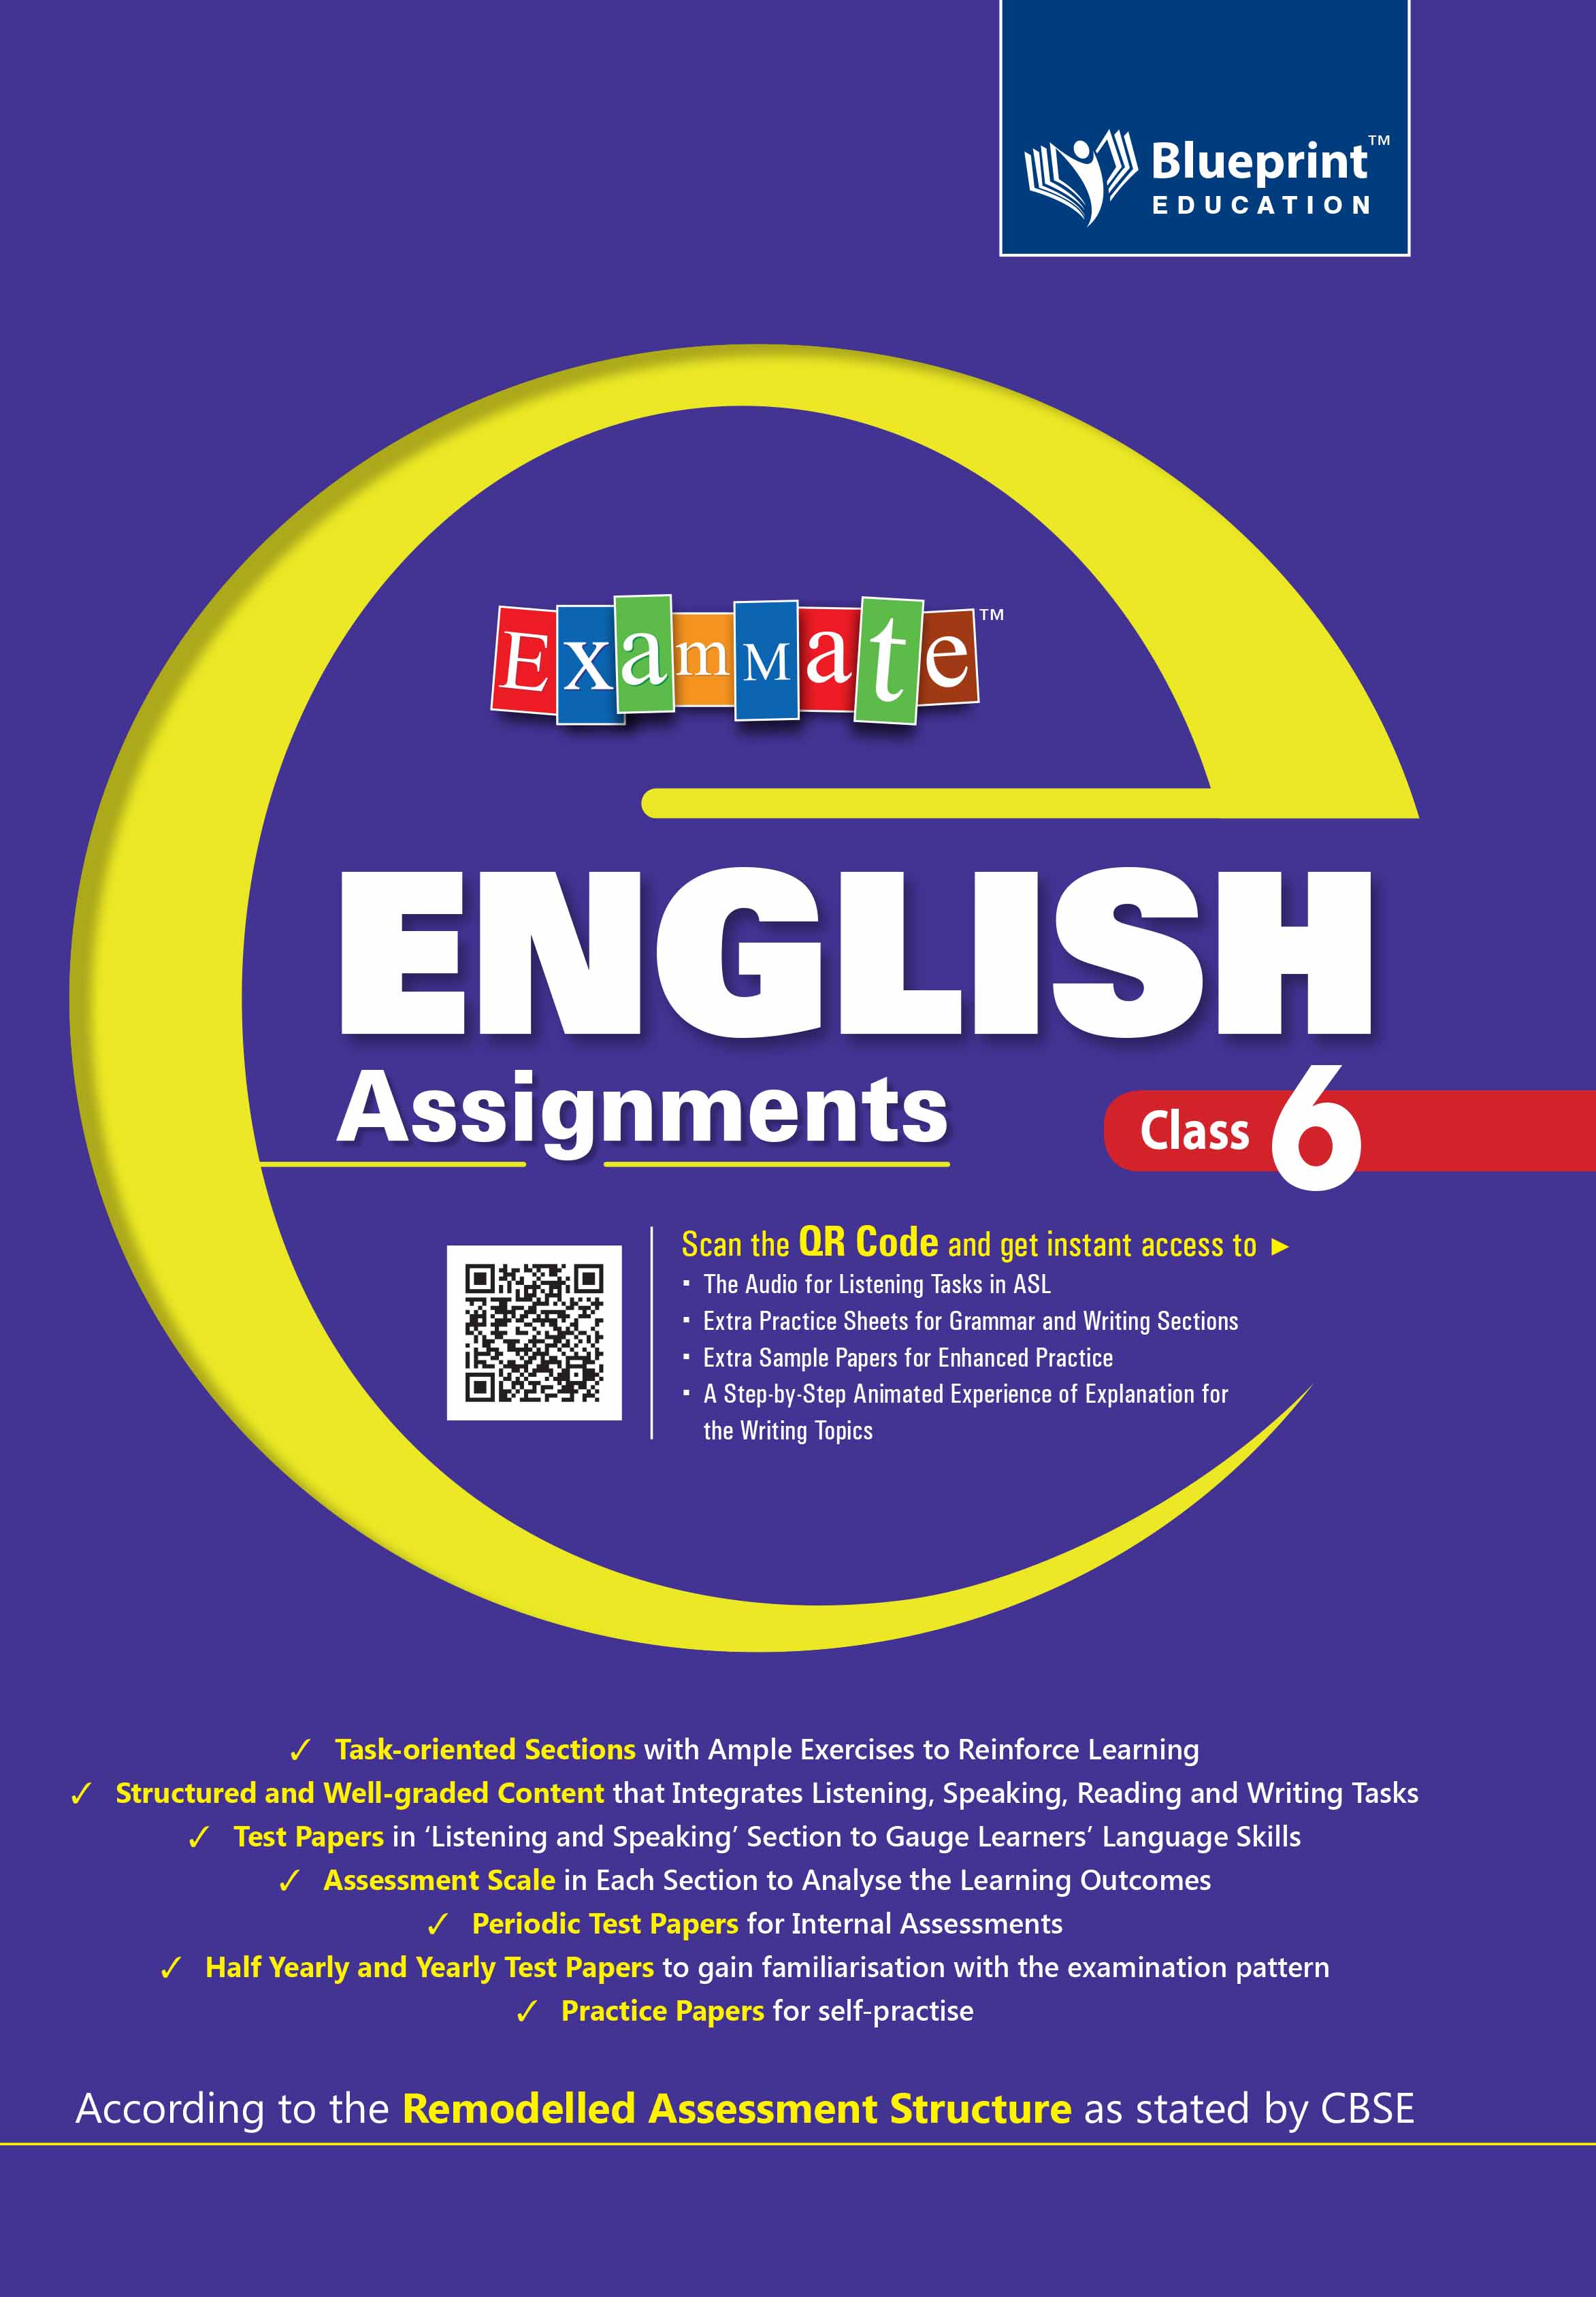 cbse assignment for class 5 english